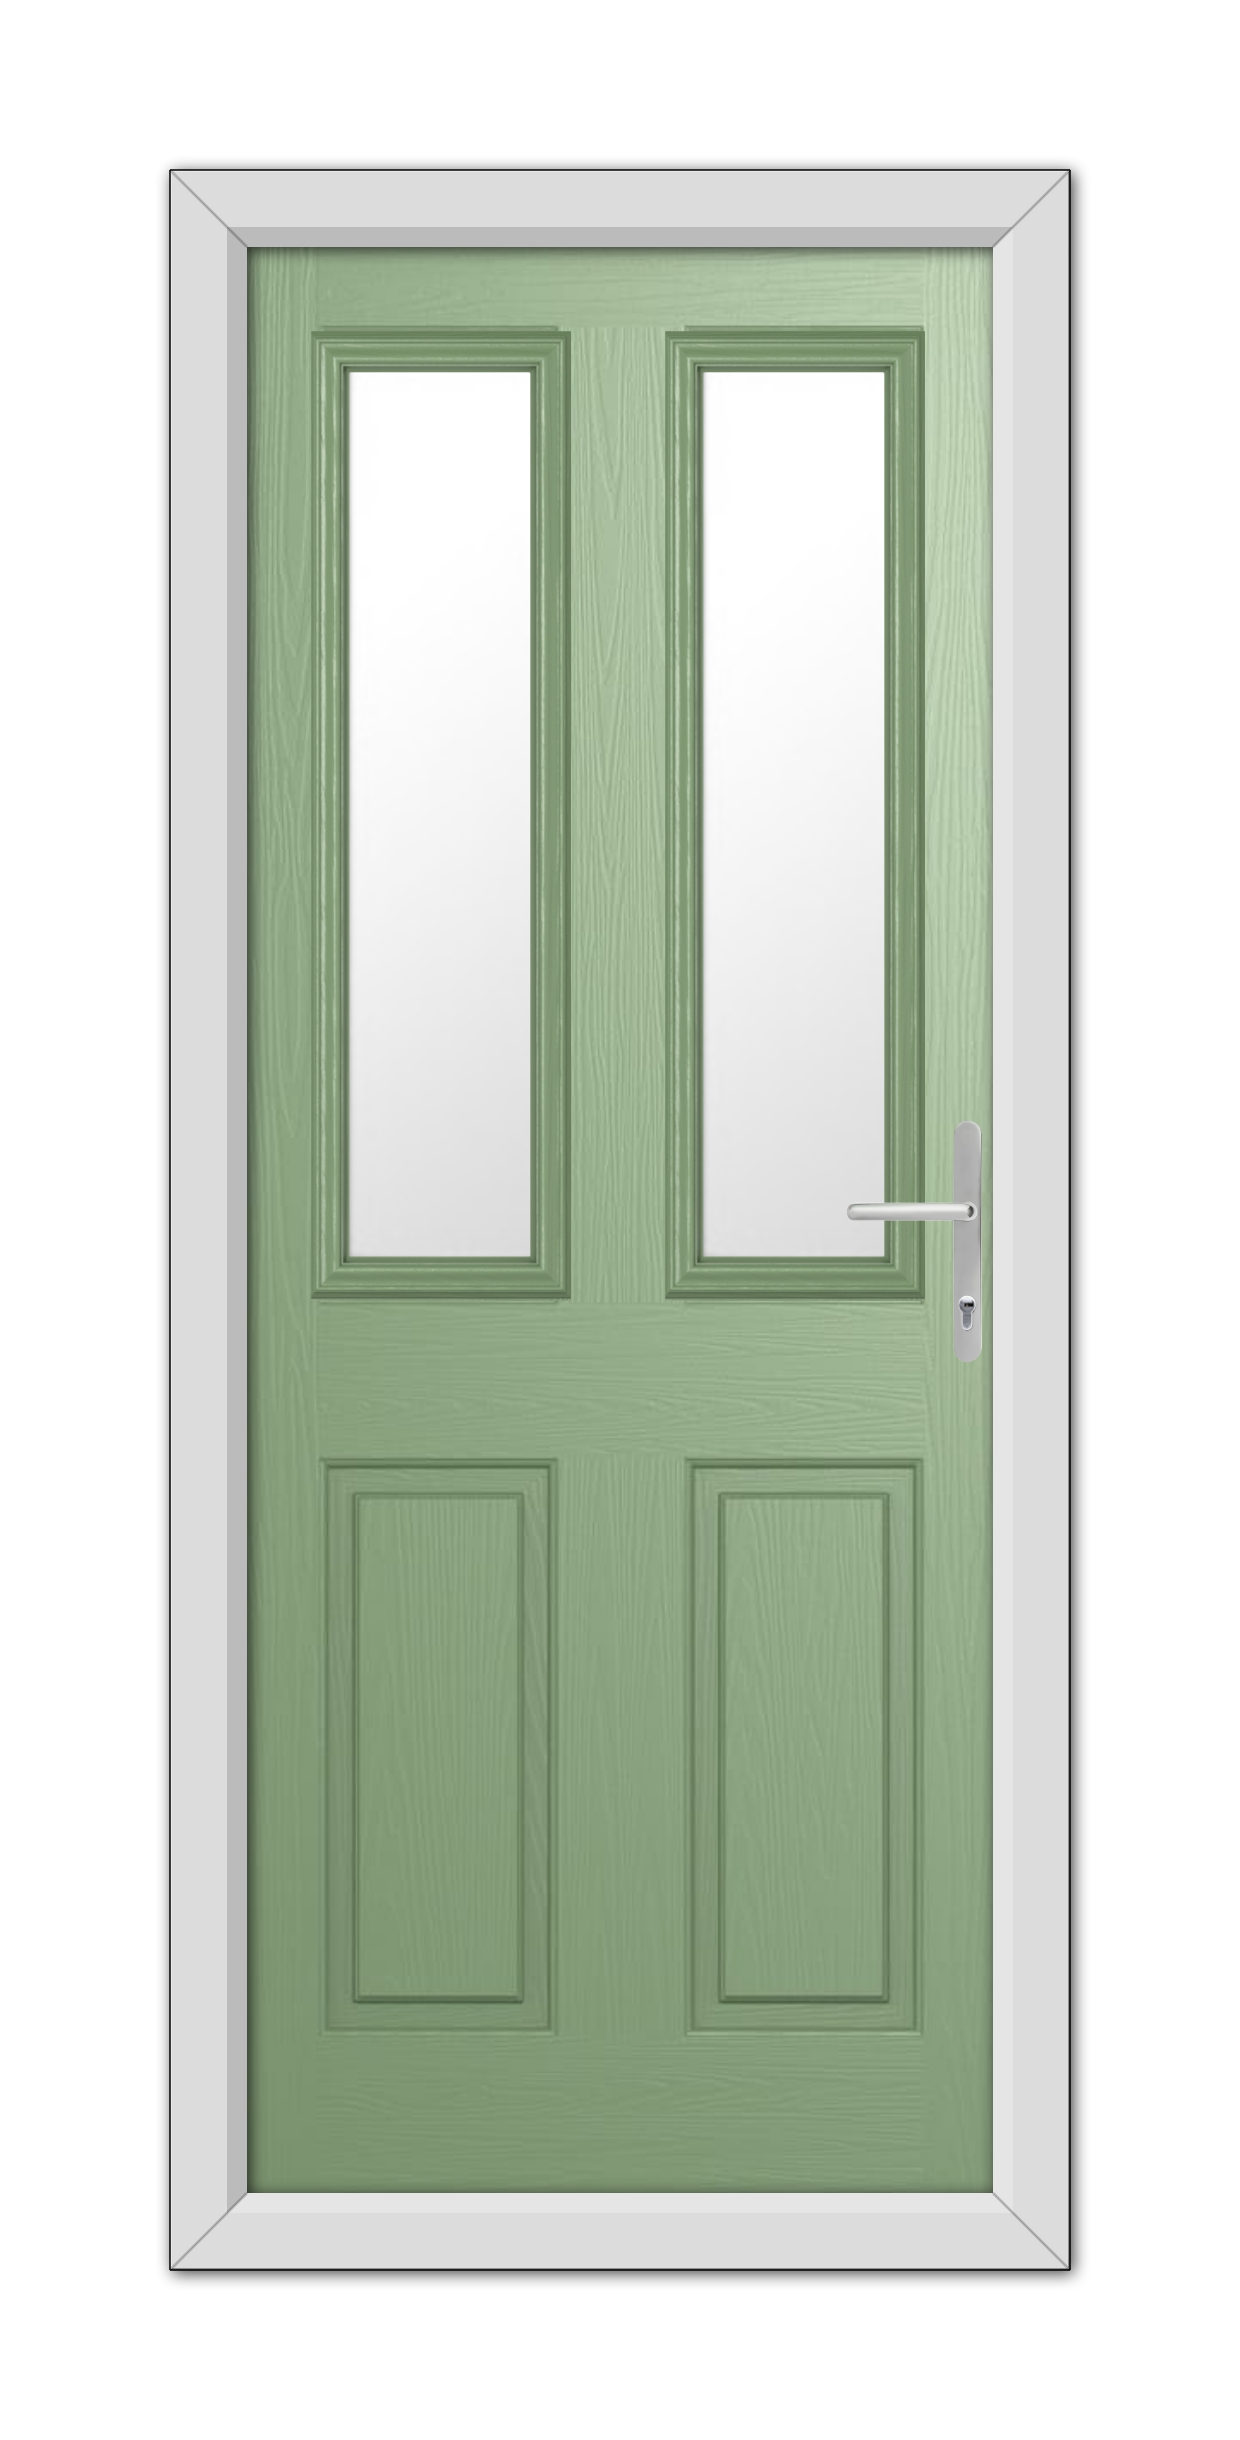 A Chartwell Green Whitmore Composite Door 48mm Timber Core with two rectangular windows at the top, set in a white frame, featuring a modern handle on the right.